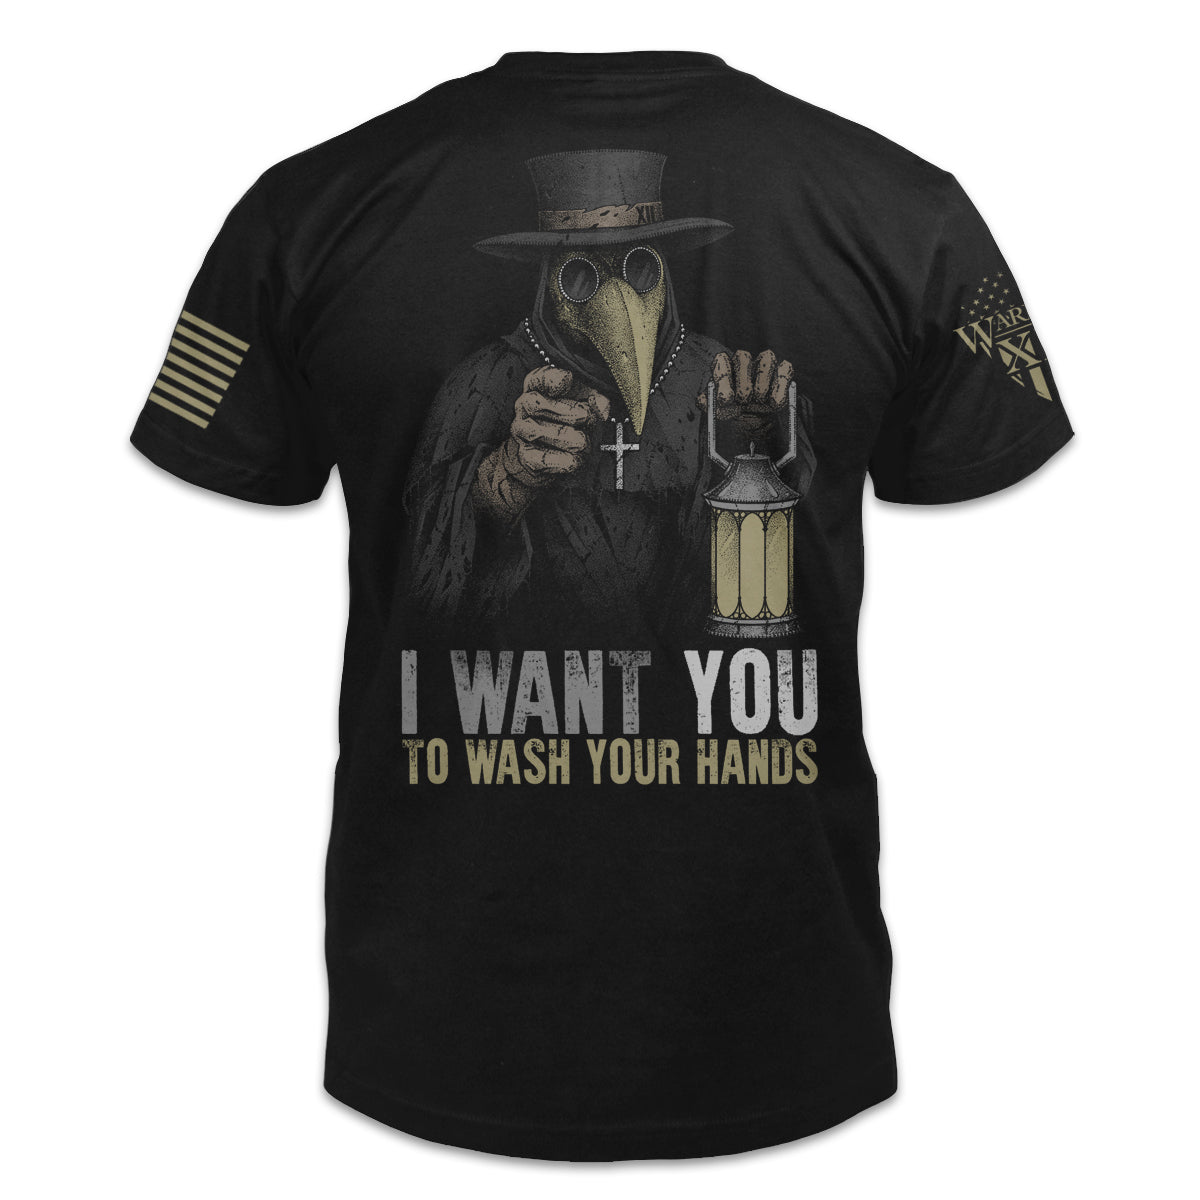 A black t-shirt with the words "I want YOU to wash your hands" with a plague doctor pointing at you printed on the back of the shirt.